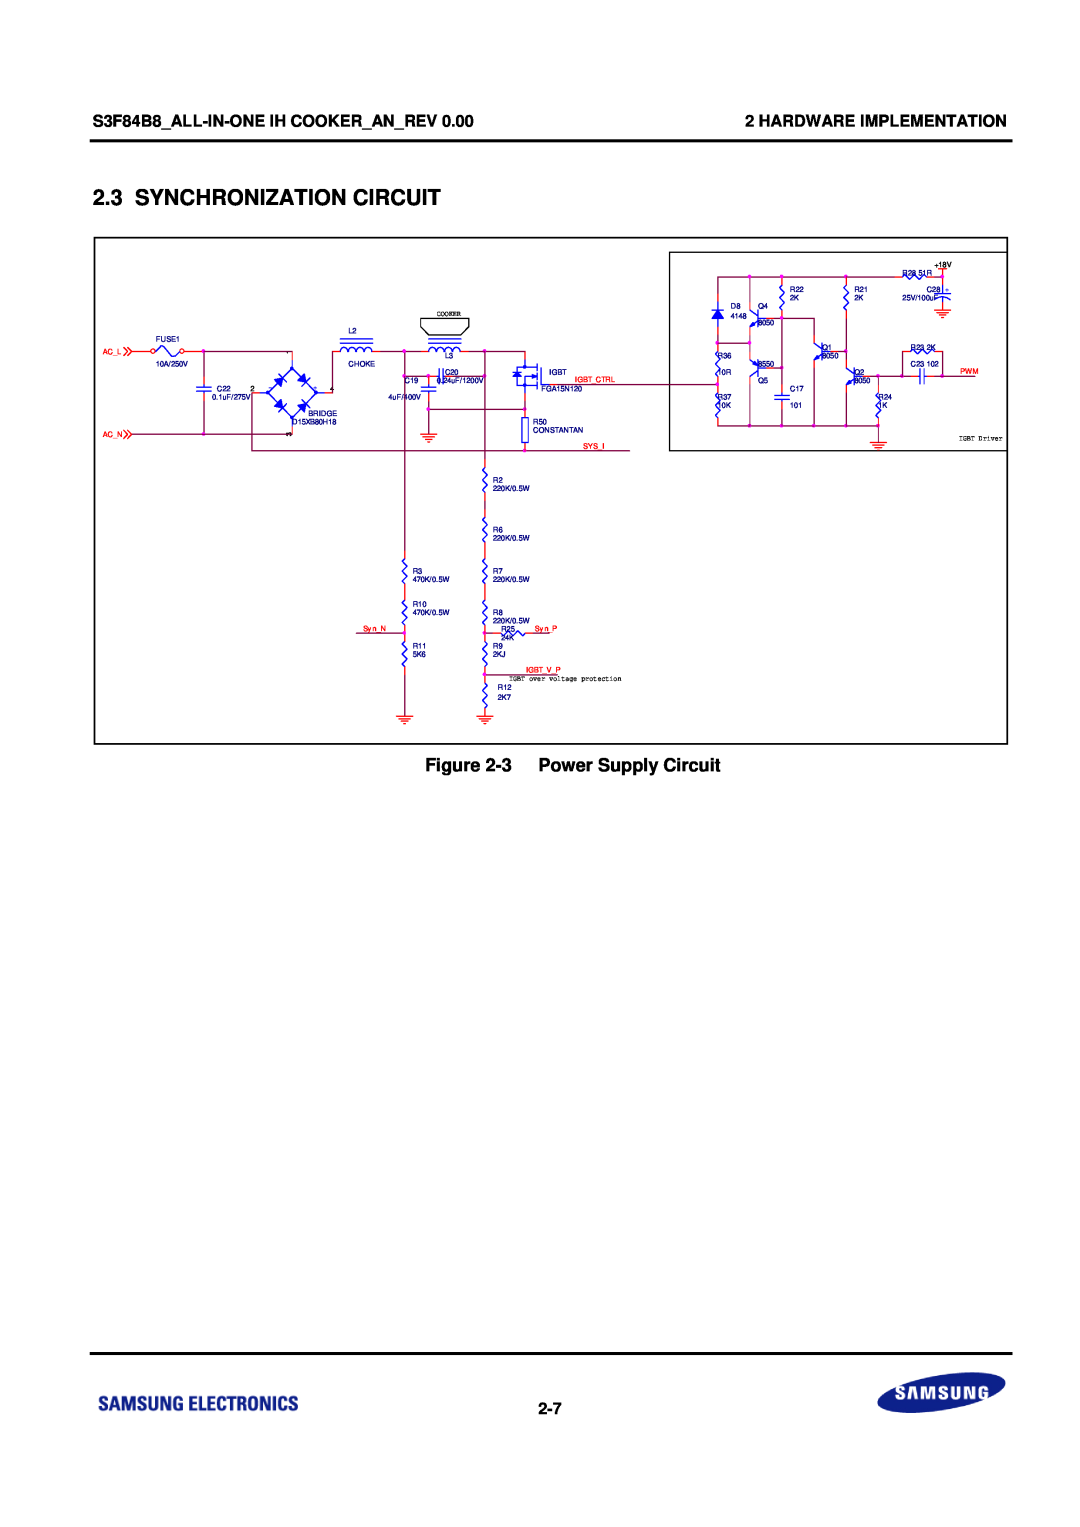 Samsung Synchronization Circuit, 3 Power Supply Circuit, S3F84B8ALL-IN-ONE IH COOKERANREV, Hardware Implementation 